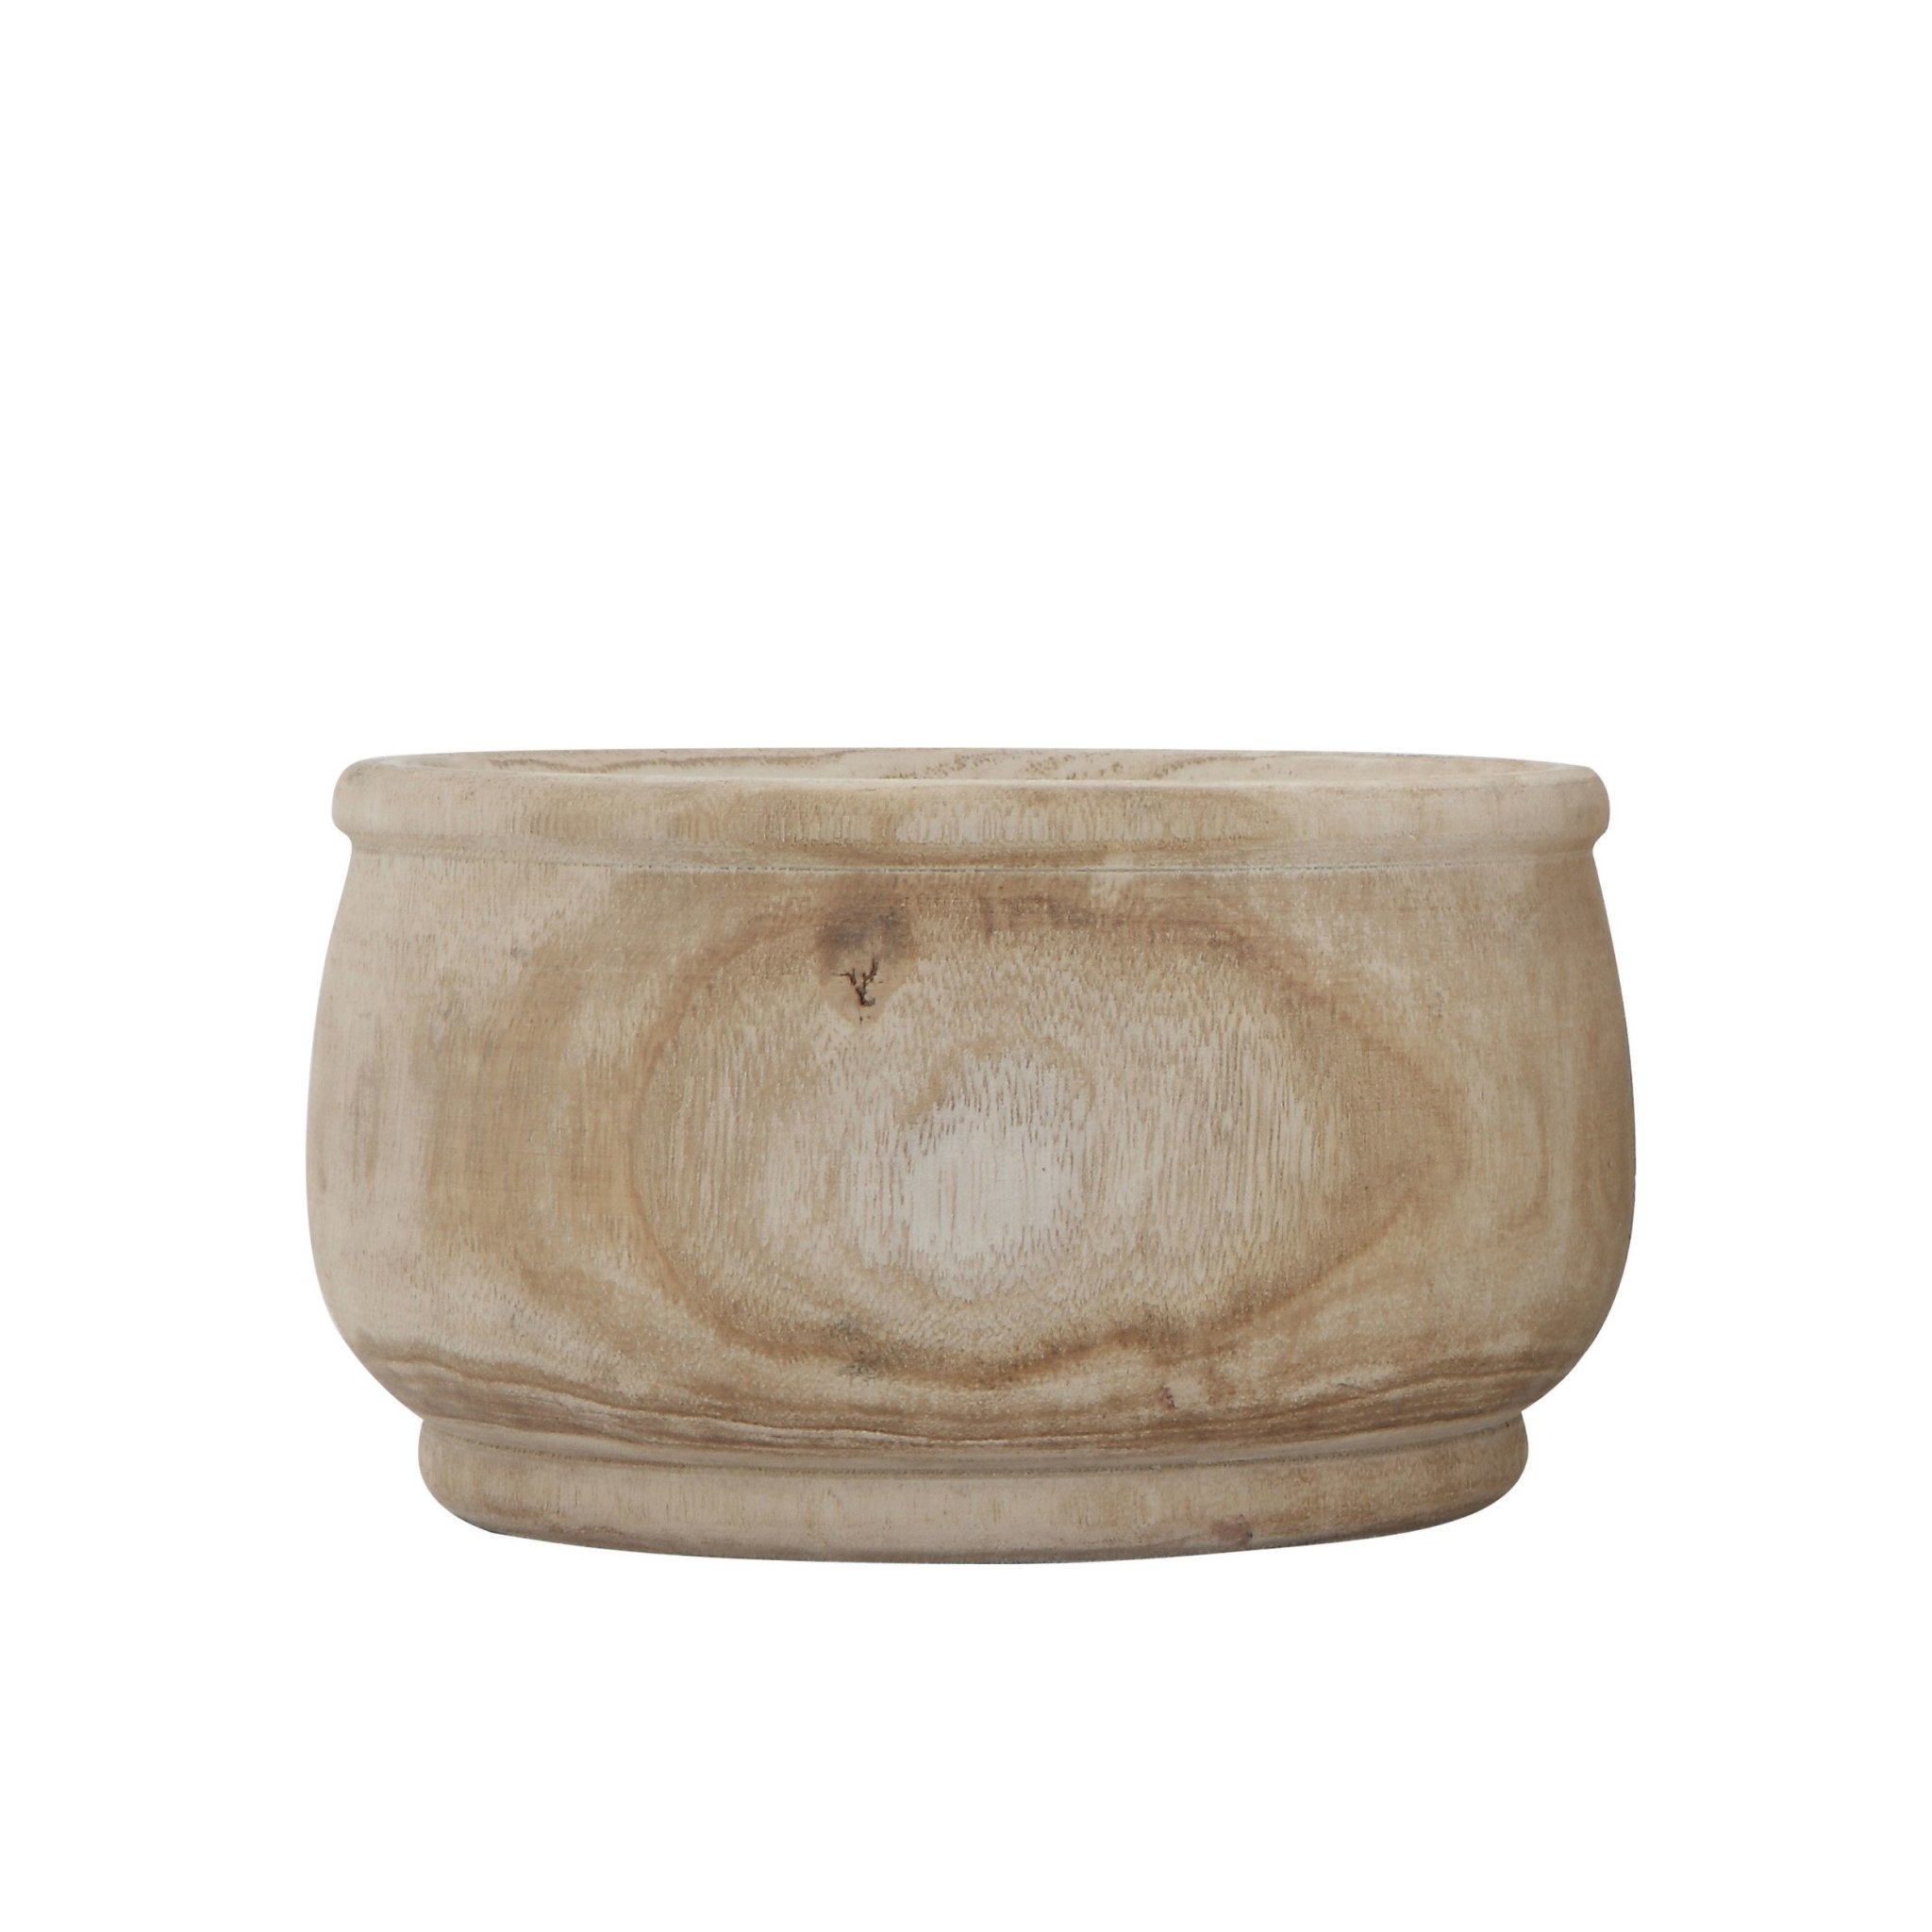 Paulownia Wood Planter, Available for local pick up